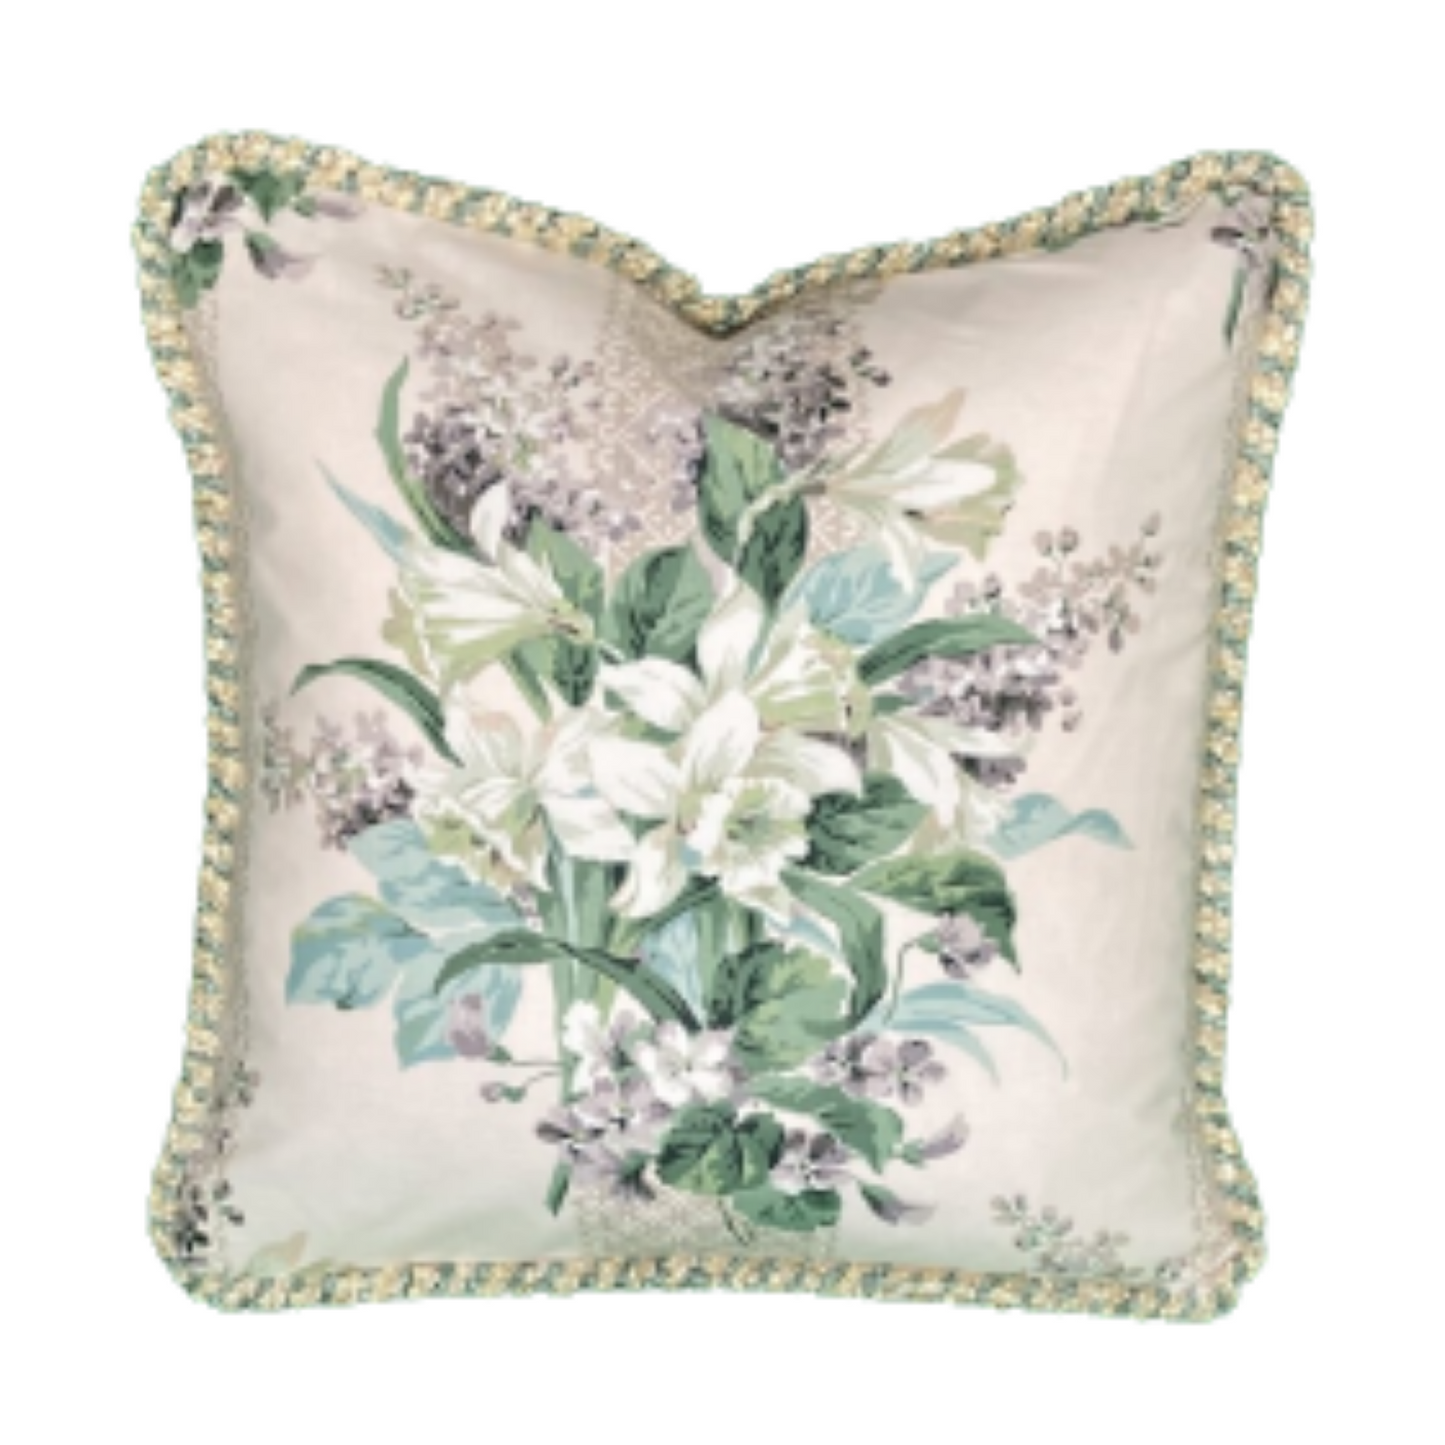 Wildflower Stripe by Jean Monro 16 x 16 Square Decorative Pillow with Down Feather Insert